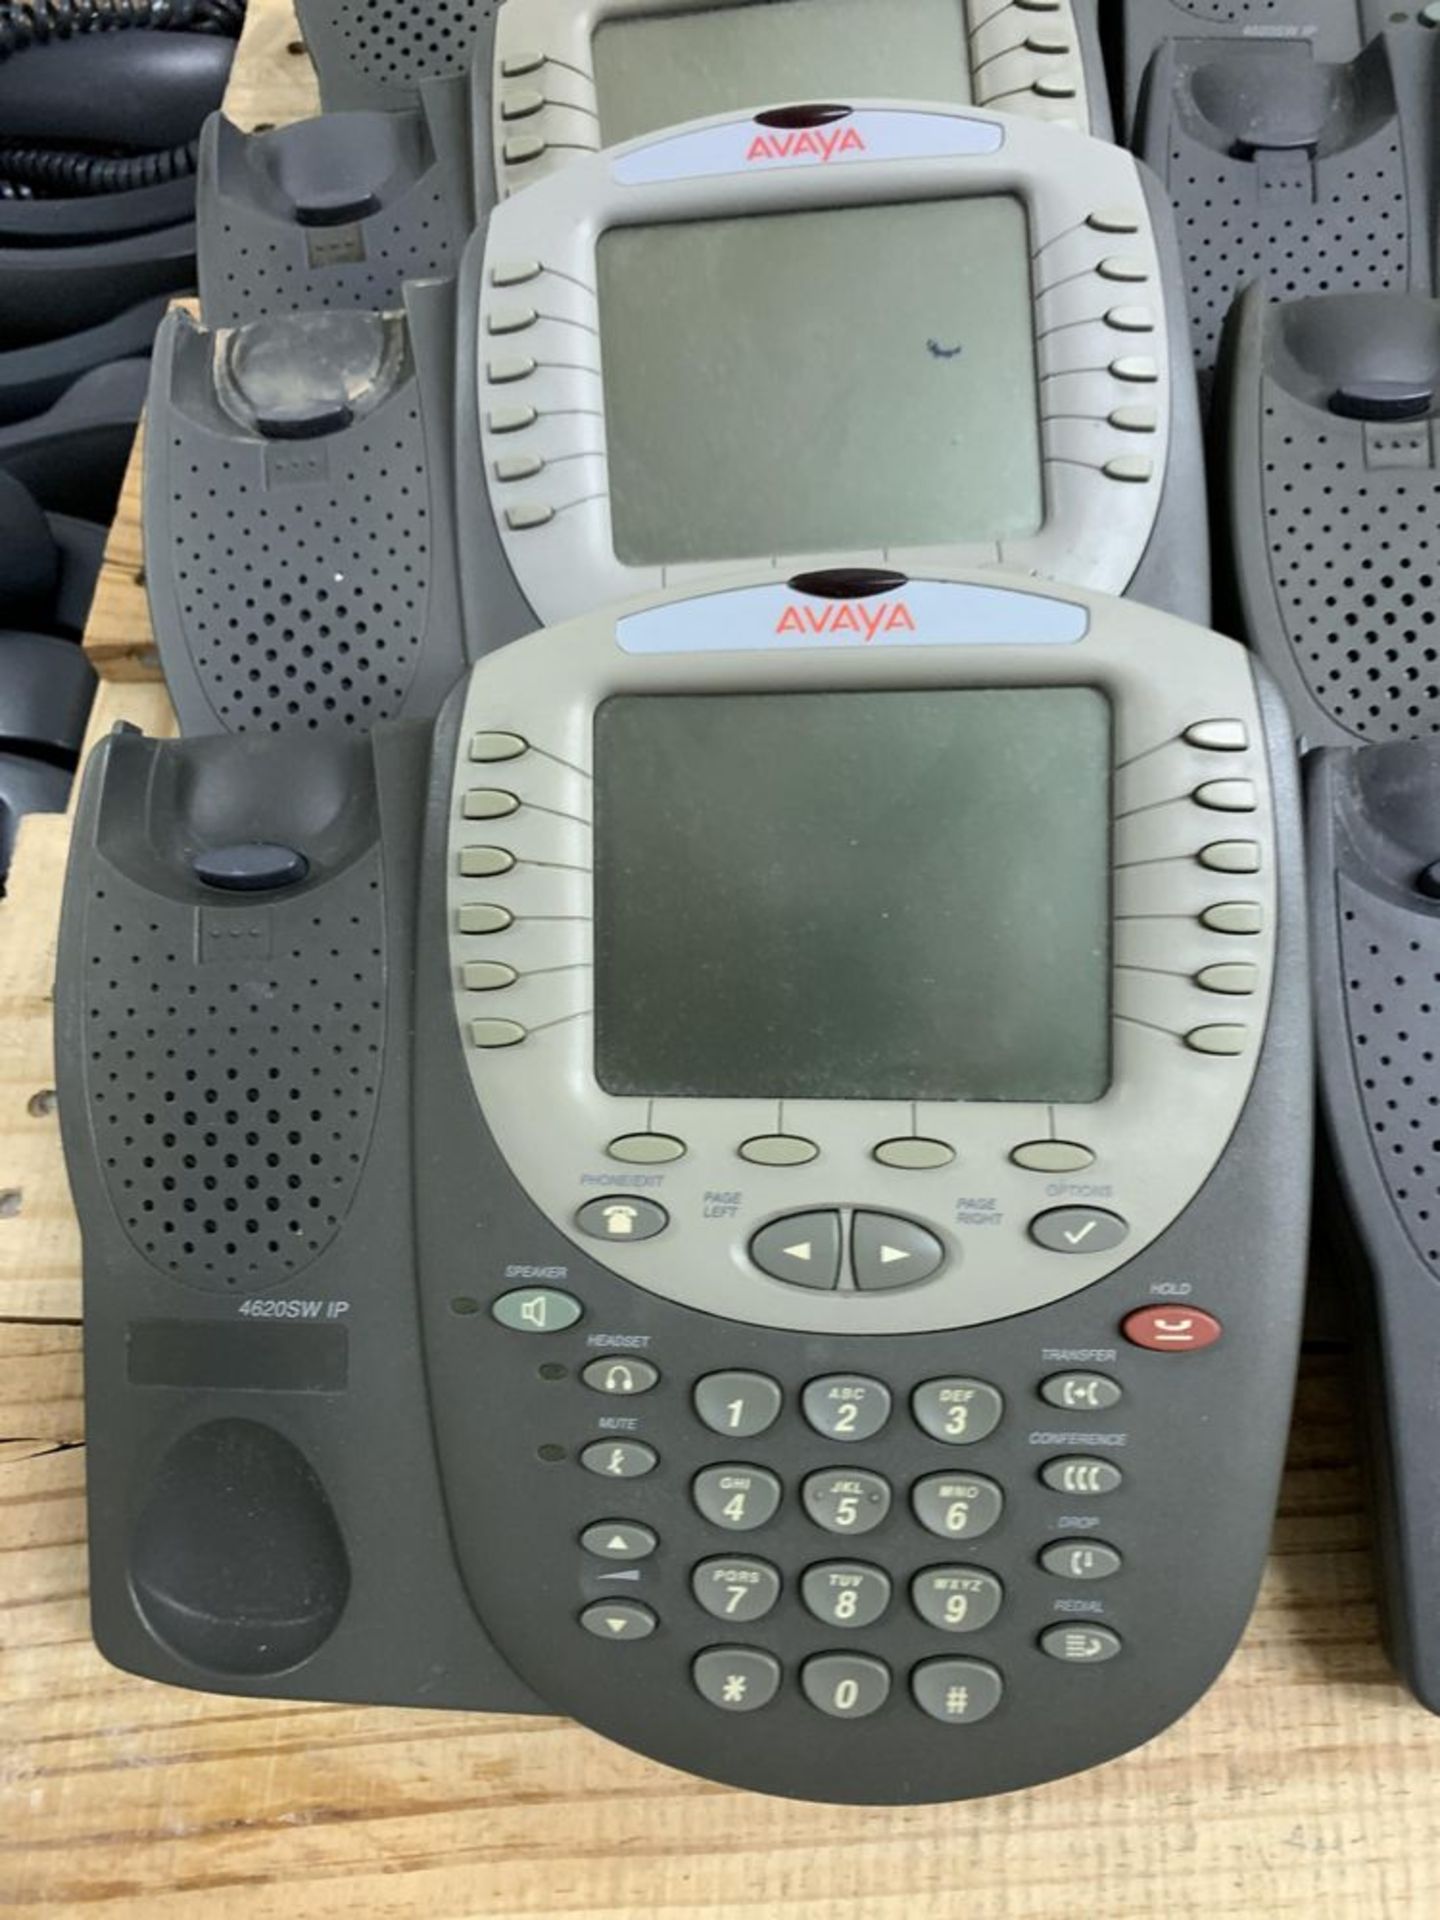 12 AVAYA PHONE HANDSETS, MODEL 4620SW IPALL ITEMS ARE SOLD AS IS UNTESTED BUT CAME FROM A WORKING - Image 3 of 4